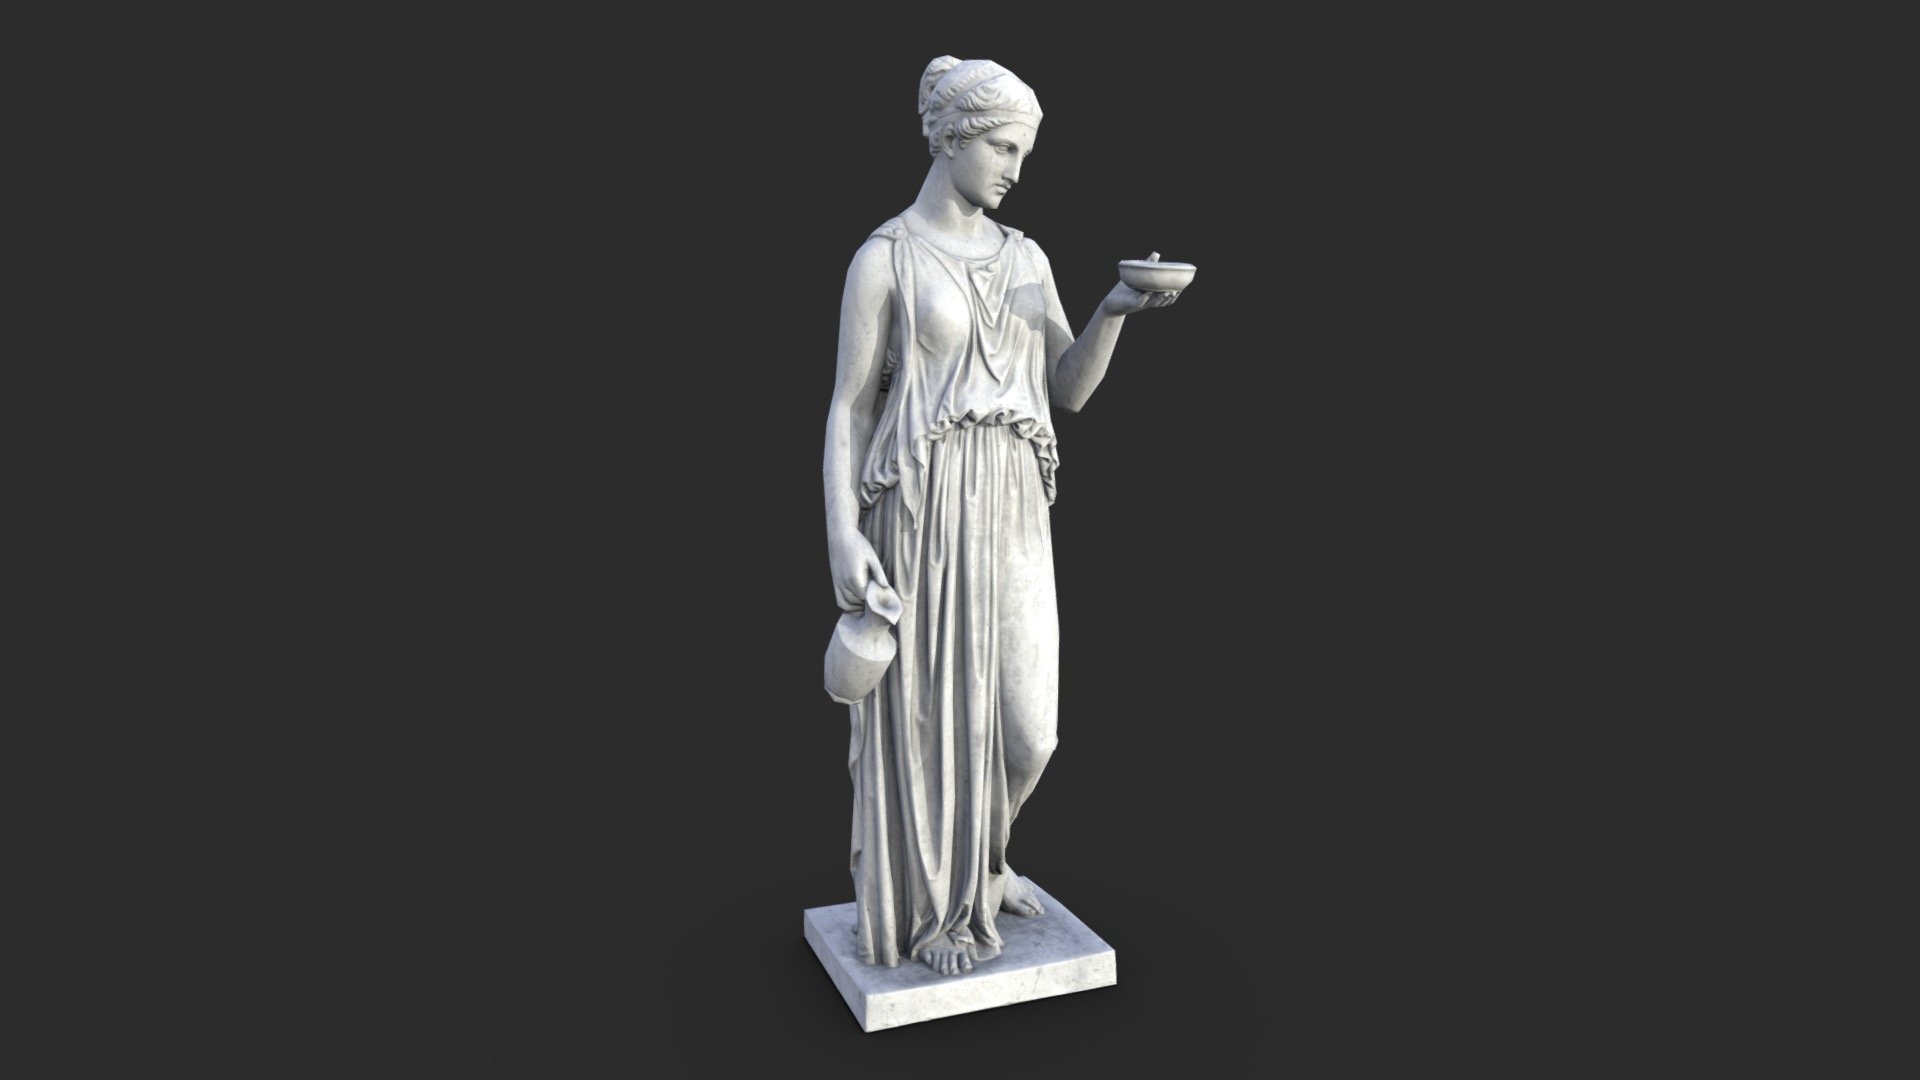 This Hebe Antique Statue in granite material includes 5 LODs and a collider set. 

The asset is available in realistic style and can be used in any game (post-apo, first person shooter, GTA like, historical… ). All objects share a unique material for the best optimization for games.

This AAA game asset of an antique sculpture will embellish you scene and add more details which can help the gameplay and the game-design or level-design.

All textures are PBR ready and available in 4K.

Low-poly model &amp; Blender native 3.3

SPECIFICATIONS


Objects : 1
Polygons : 4014
Render engine : Eevee (Cycles ready)

GAME SPECS


LODs : Yes (inside FBX for Unity &amp; Unreal)
Numbers of LODs : 5
Collider : Yes

EXPORTED FORMATS


FBX
Collada
OBJ

TEXTURES


Materials in scene : 1
Textures sizes : 4K
Textures types : Base Color, Metallic, Roughness, Normal (DirectX &amp; OpenGL), Heigh, AO (also Unity &amp; Unreal ARM workflow maps)
Textures format : PNG
 - Hebe Statue - Granite - Buy Royalty Free 3D model by KangaroOz 3D (@KangaroOz-3D) 3d model